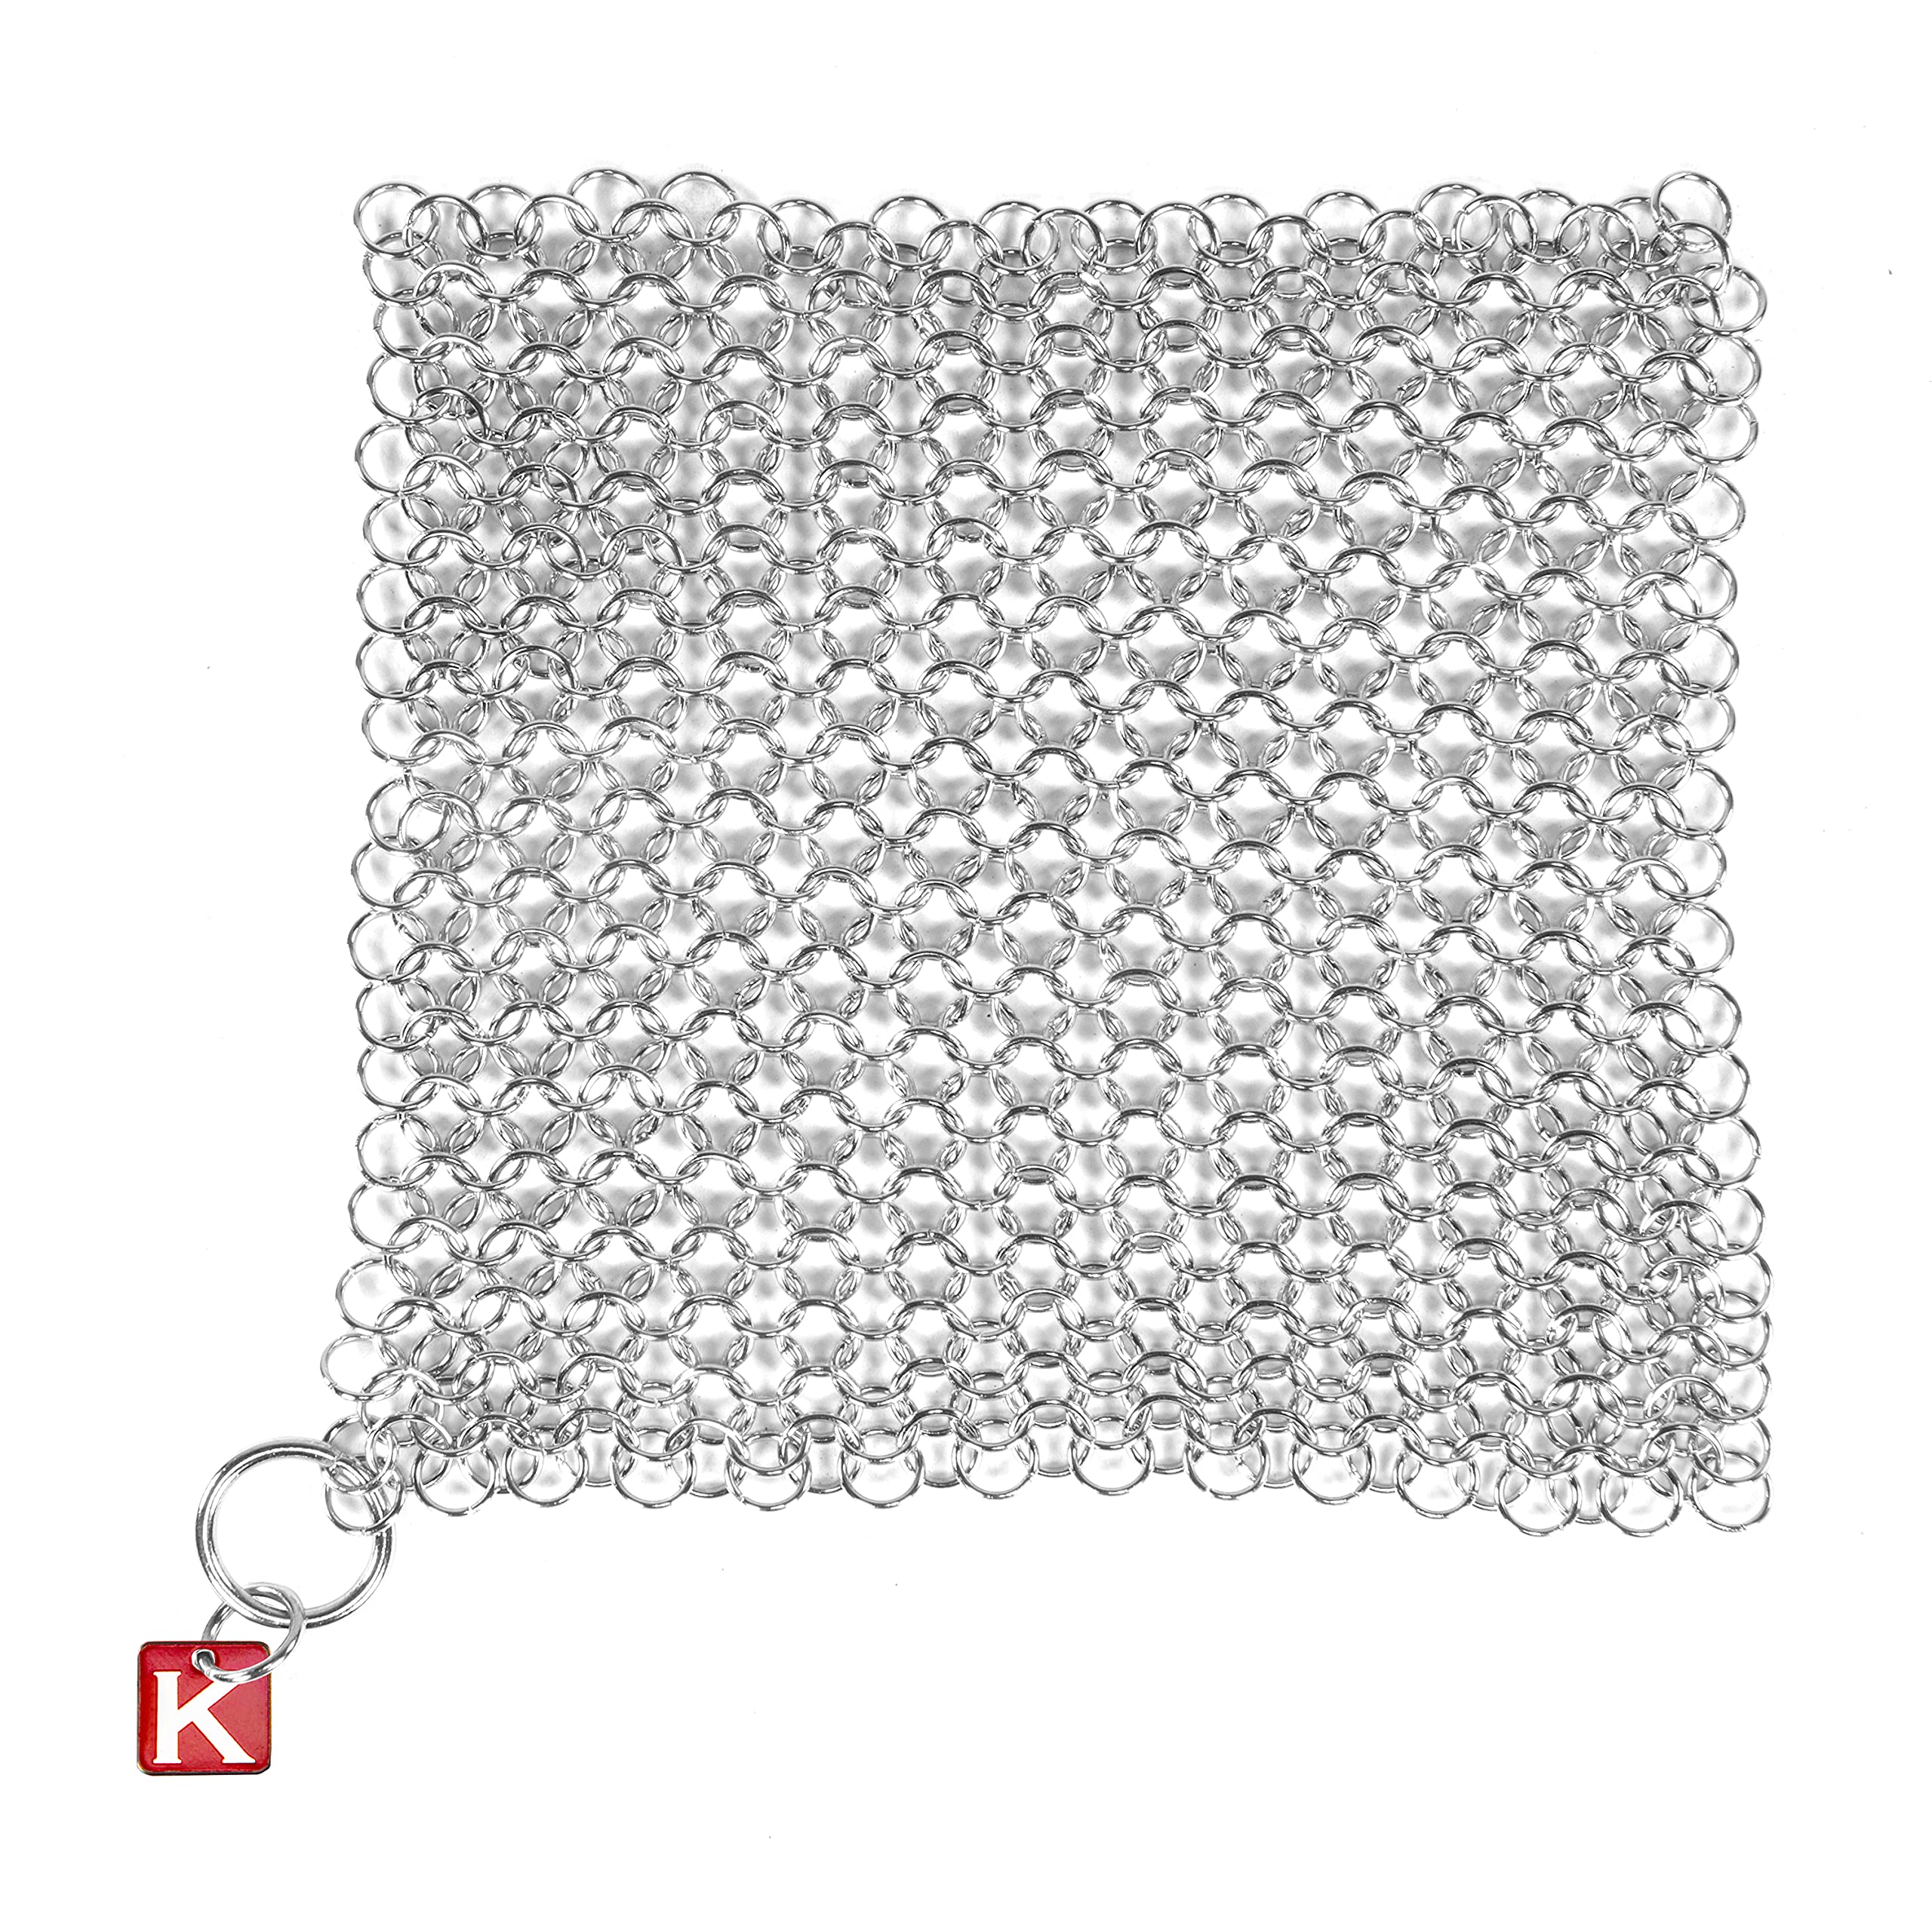 CM SCRUBBER Knapp Made Original 4 Cast Iron Scrubber- Chainmail Scrubber  for Cast Iron Pans, Hard Anodized Cookware and Other Pots. Stainless Steel